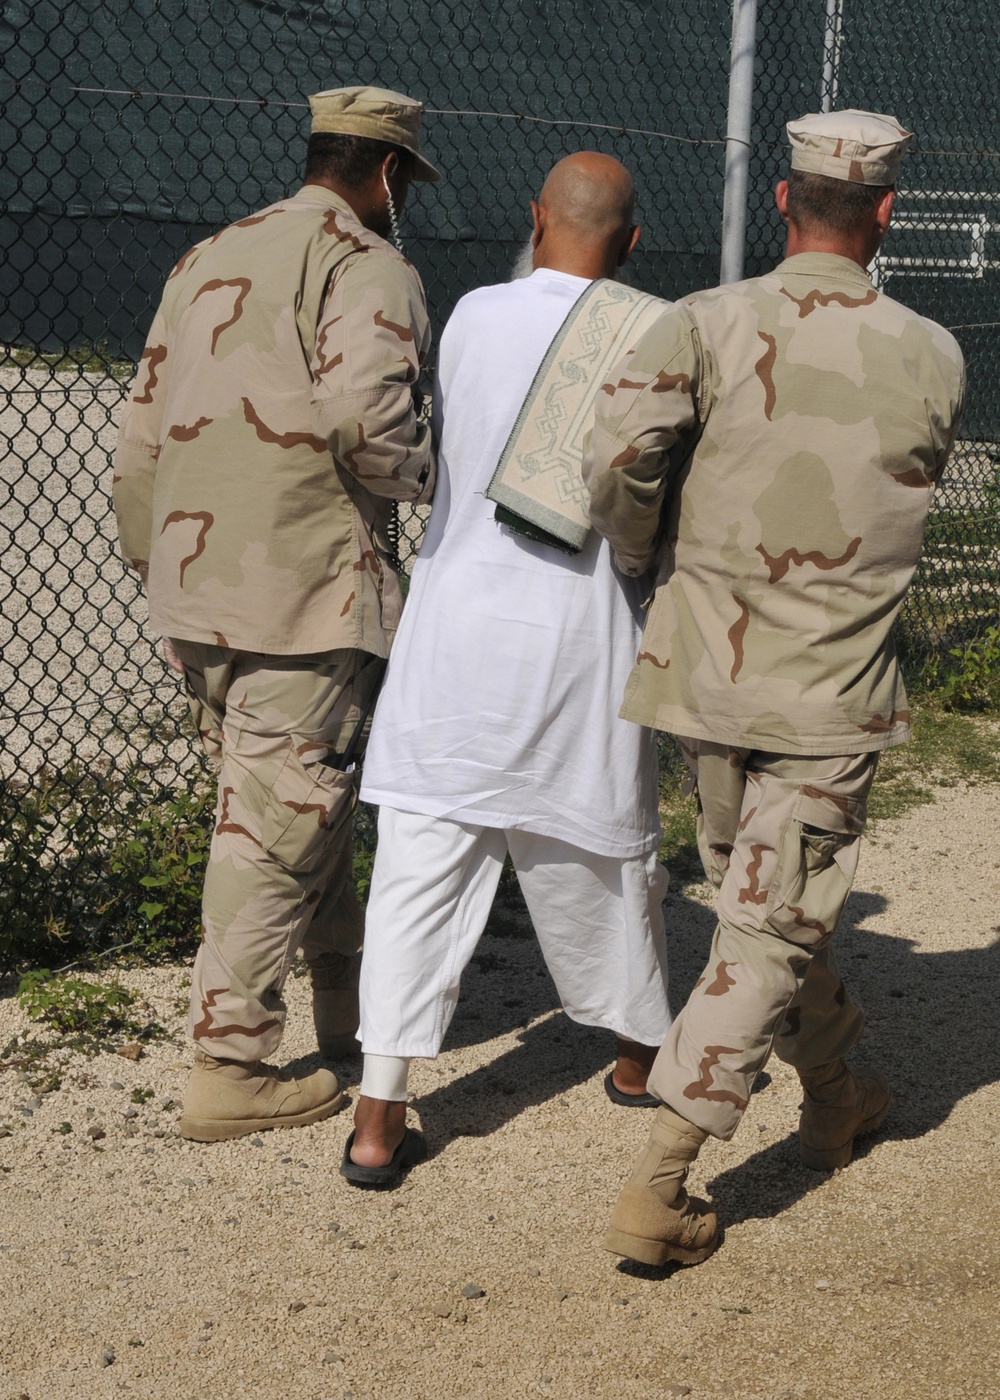 Guards Escort a Detainee in Camp Delta